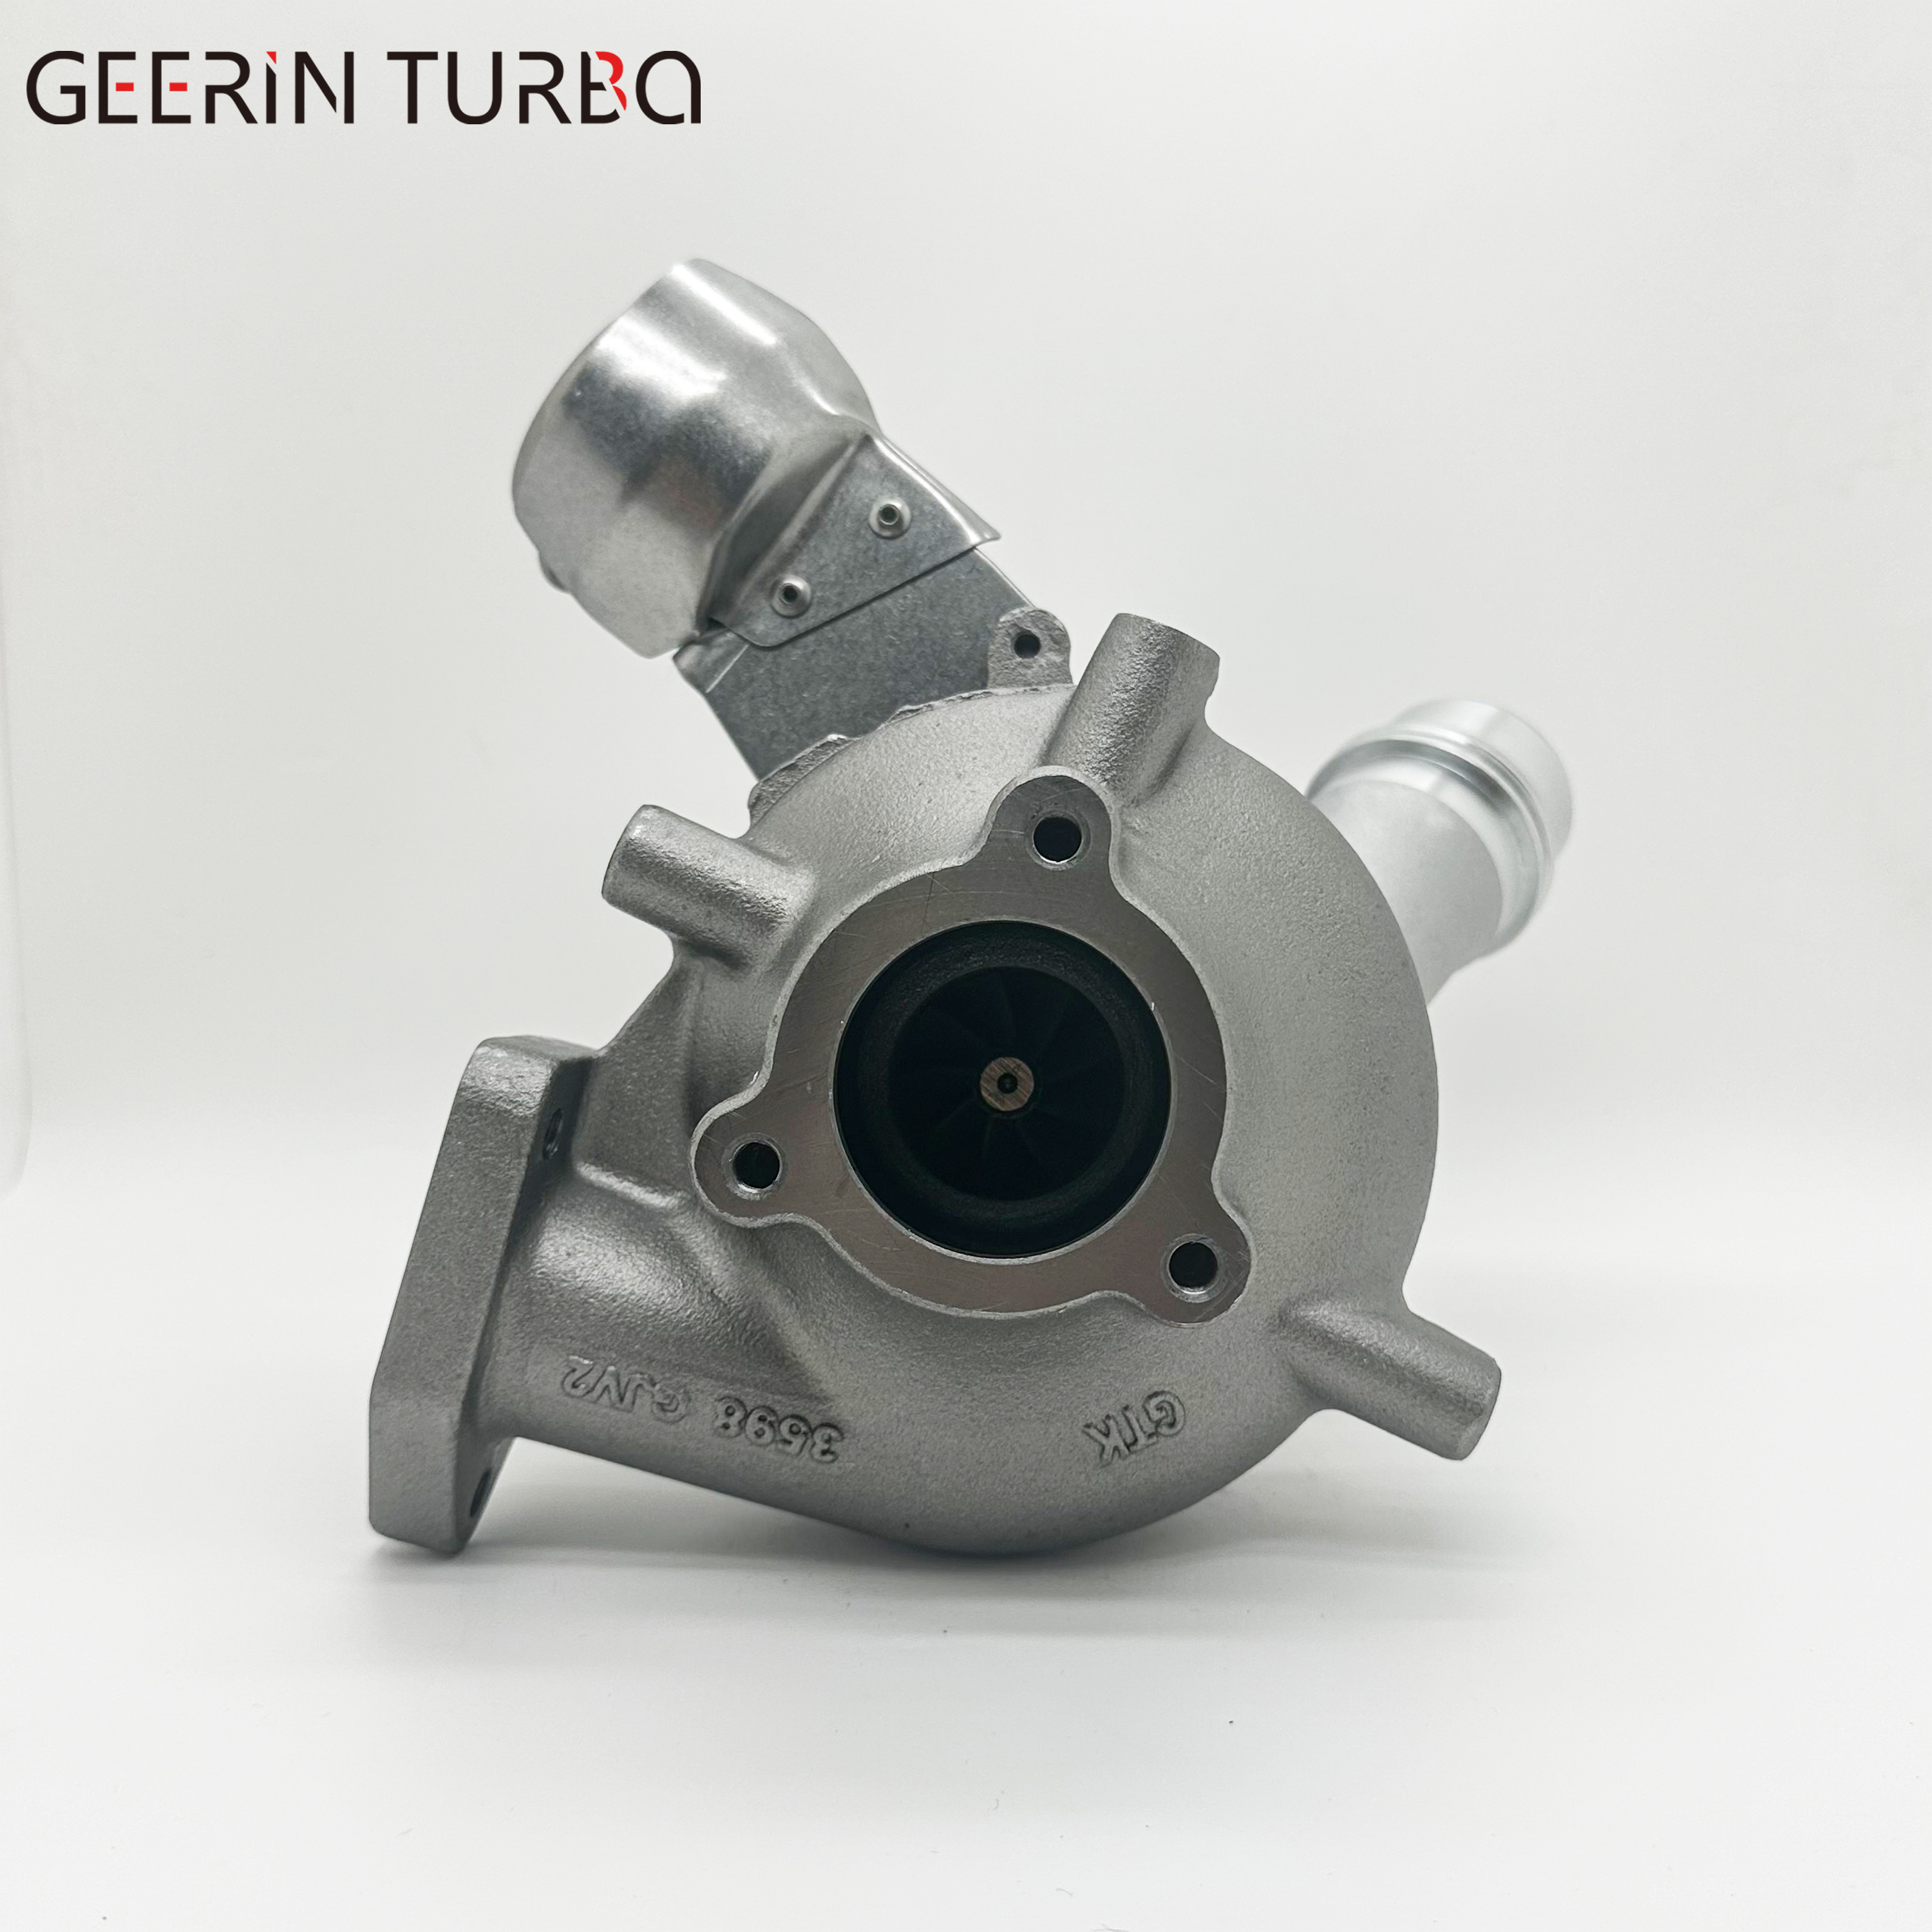 Factory Manufacturer Turbocharger BV43 28231-4A700 28500-4A700 53039700226 53039880353 Turbo Parts Engine EURO5 For HYUNDAI Factory